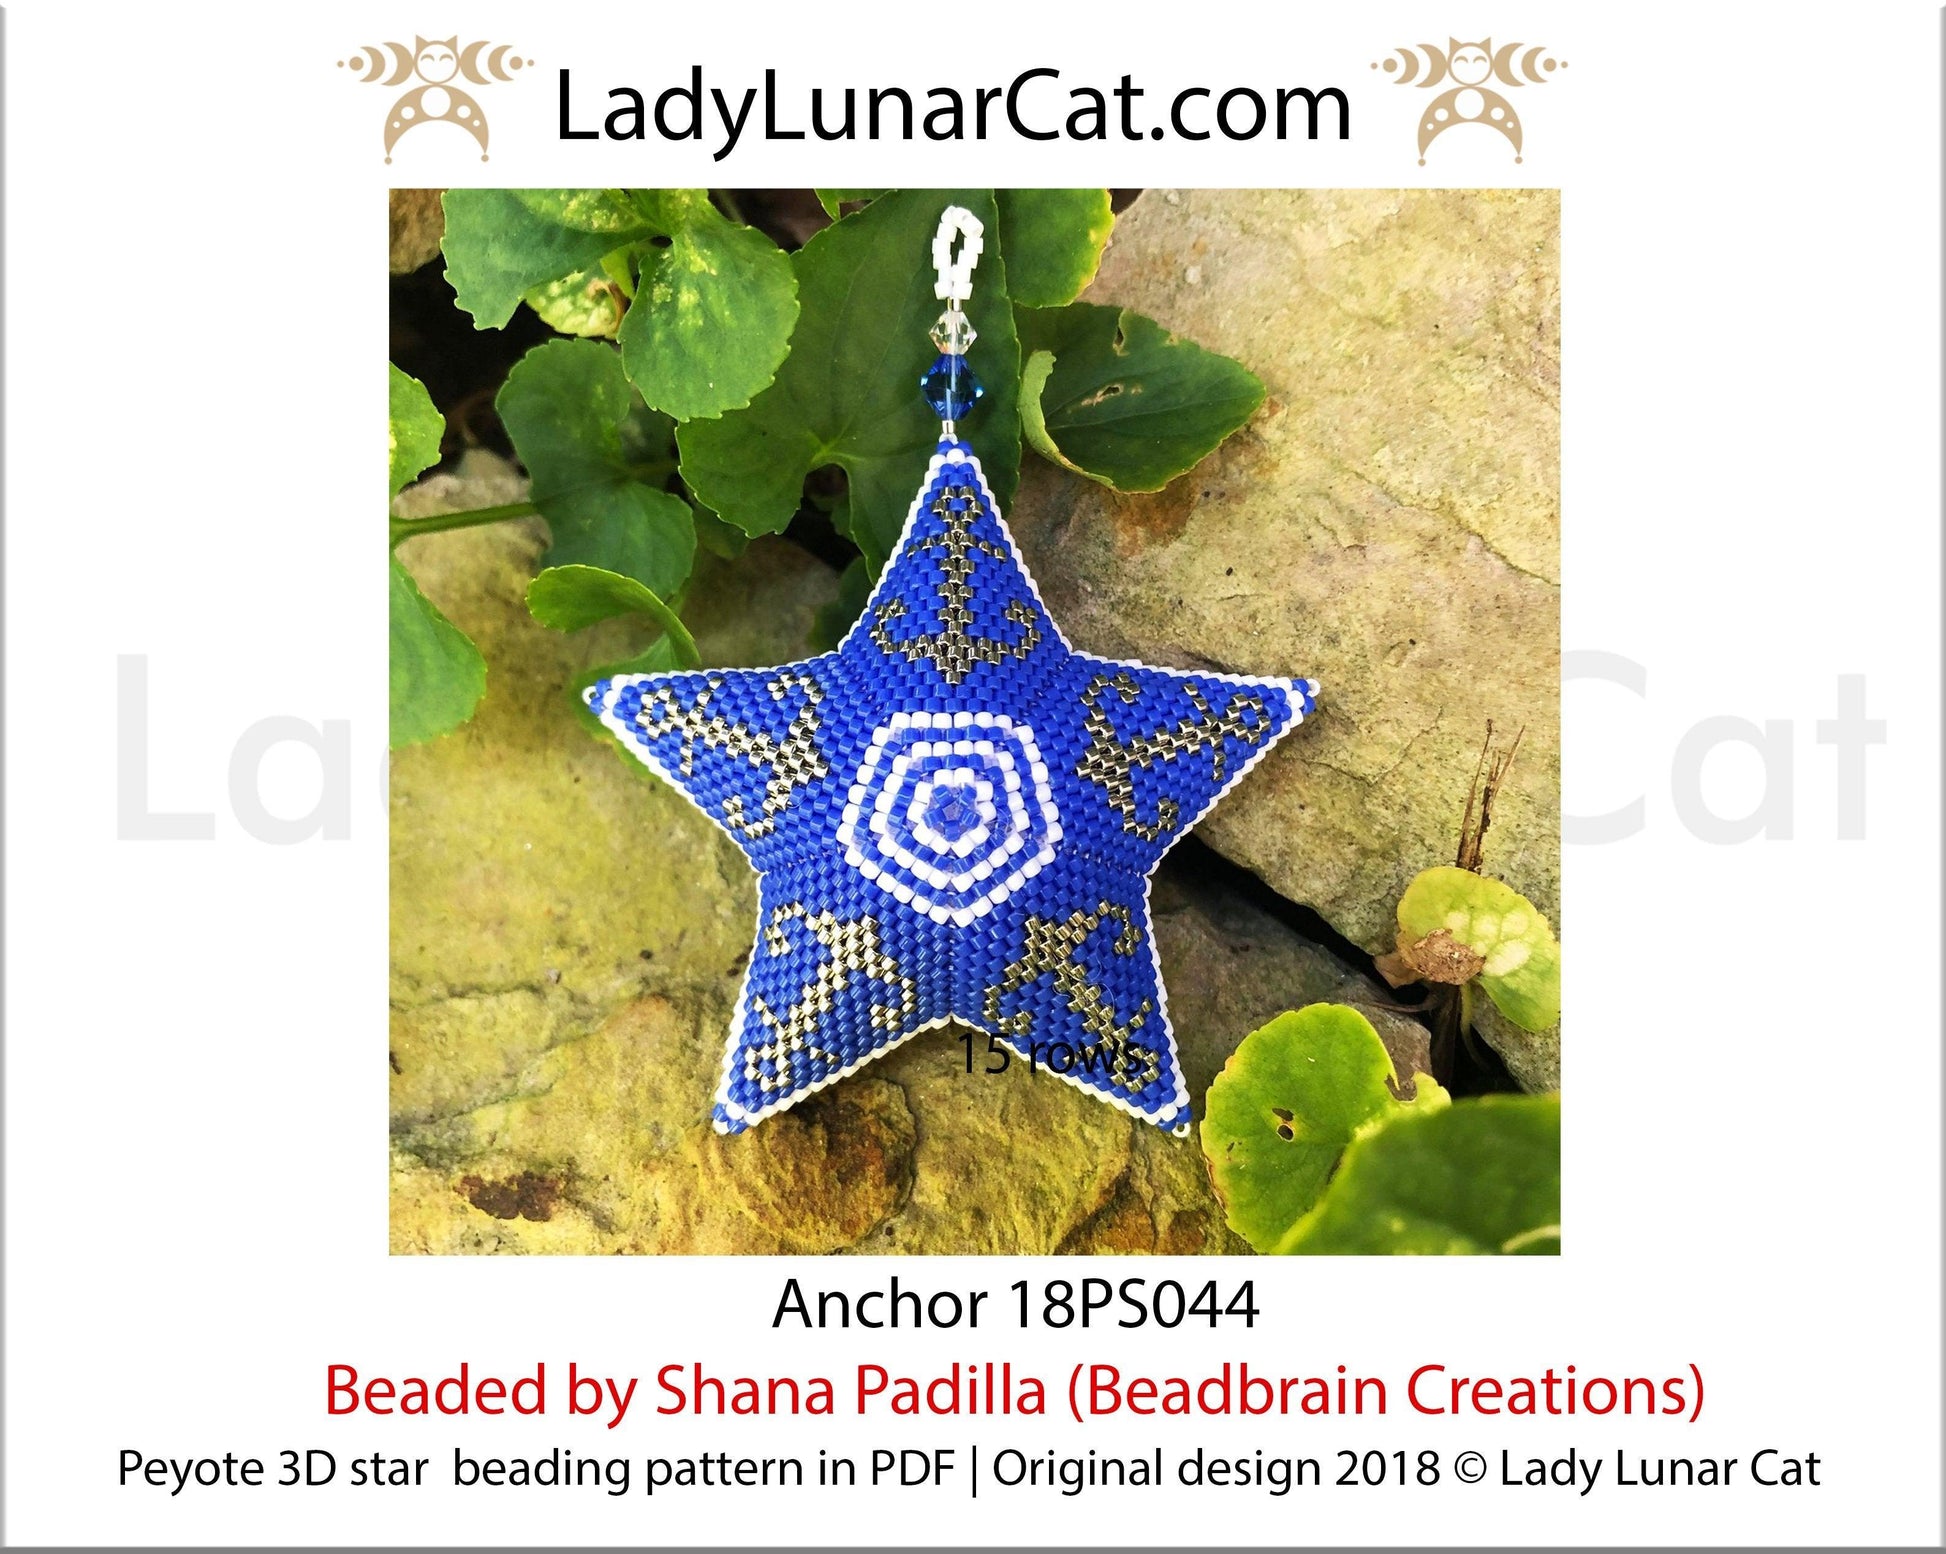 Peyote star patterns for beading Anchor 18PS044 LadyLunarCat